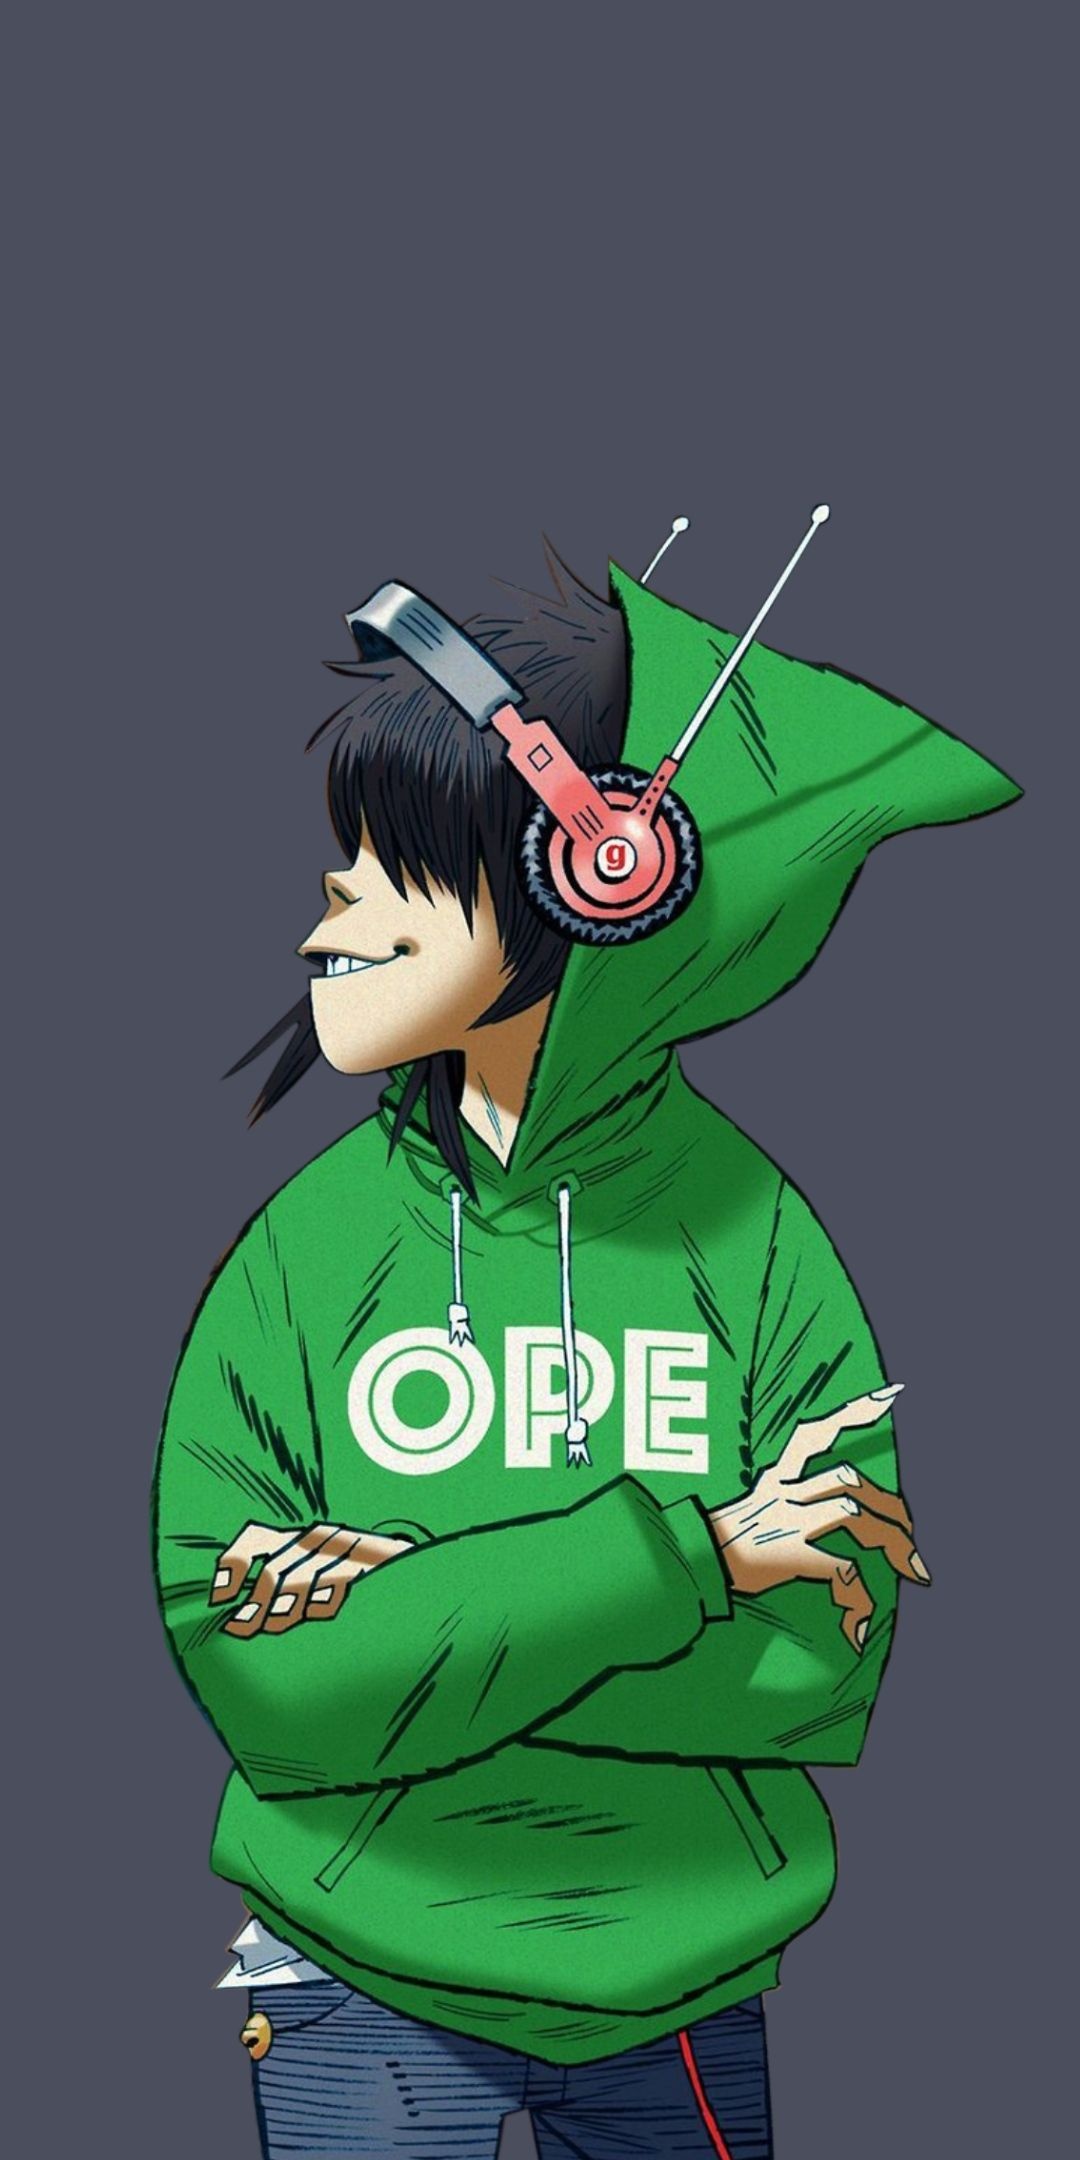 Noodle (Gorillaz): The lead vocalist for the Demon Days single “Dare”, Noodle's speaking voice provided by Haruka Abe. 1080x2160 HD Background.